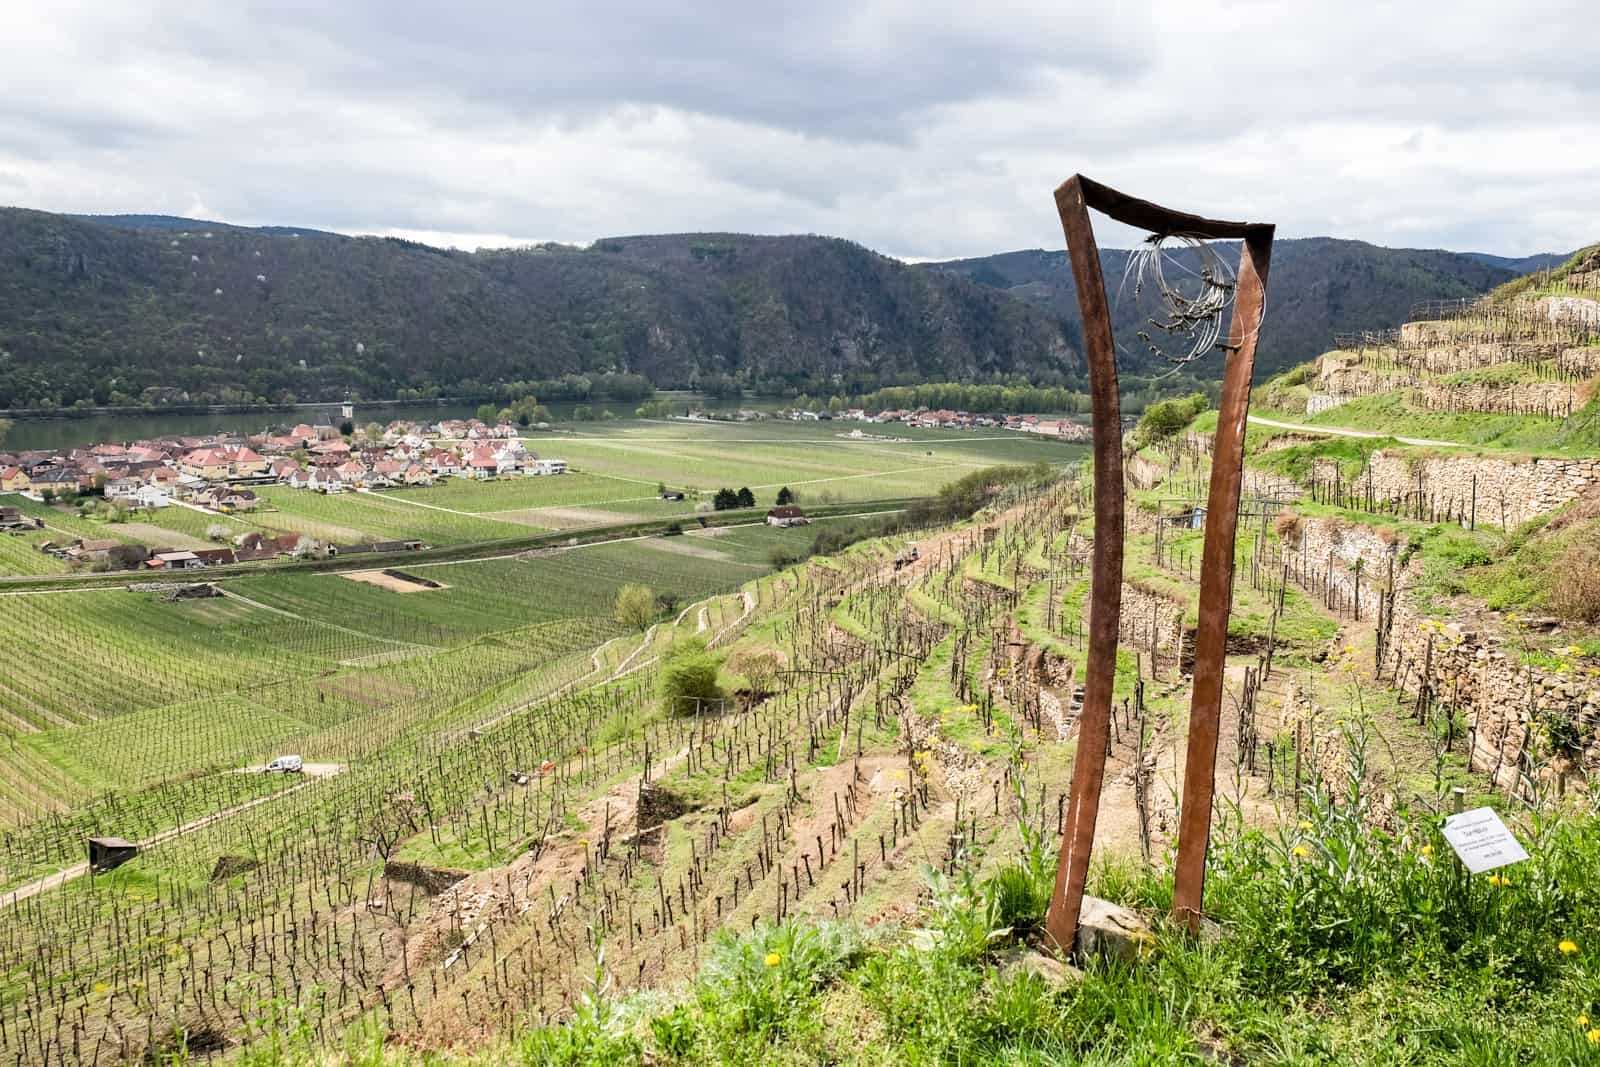 A squashed door frame shape metal art sculpture on The Wachau World Heritage Trail looking out over a slope of vineyard terraces